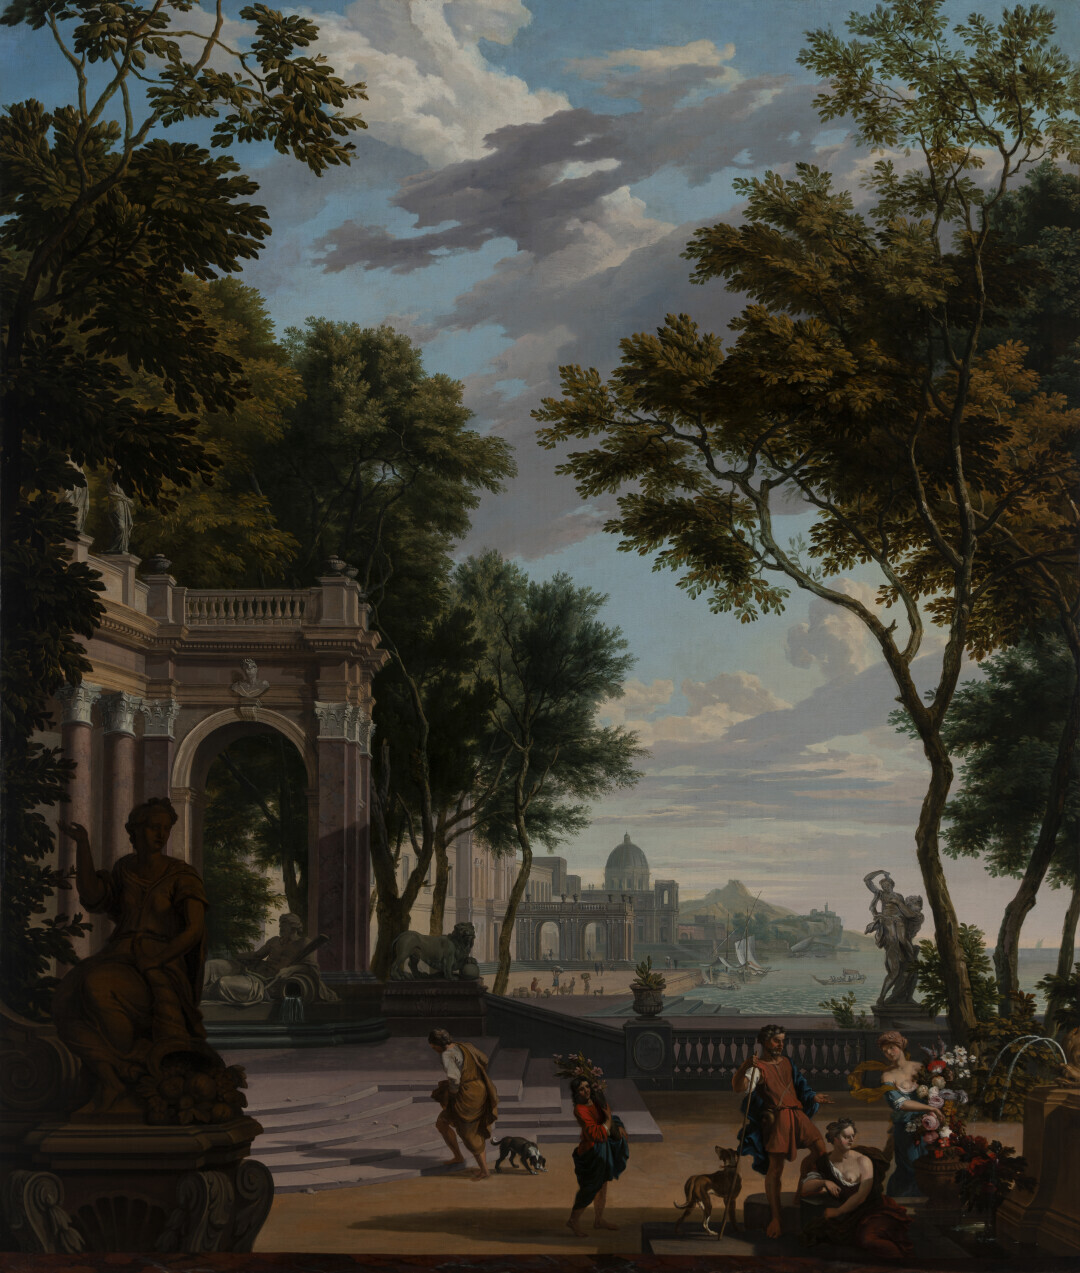 Fantasy landscape with architecture and figures